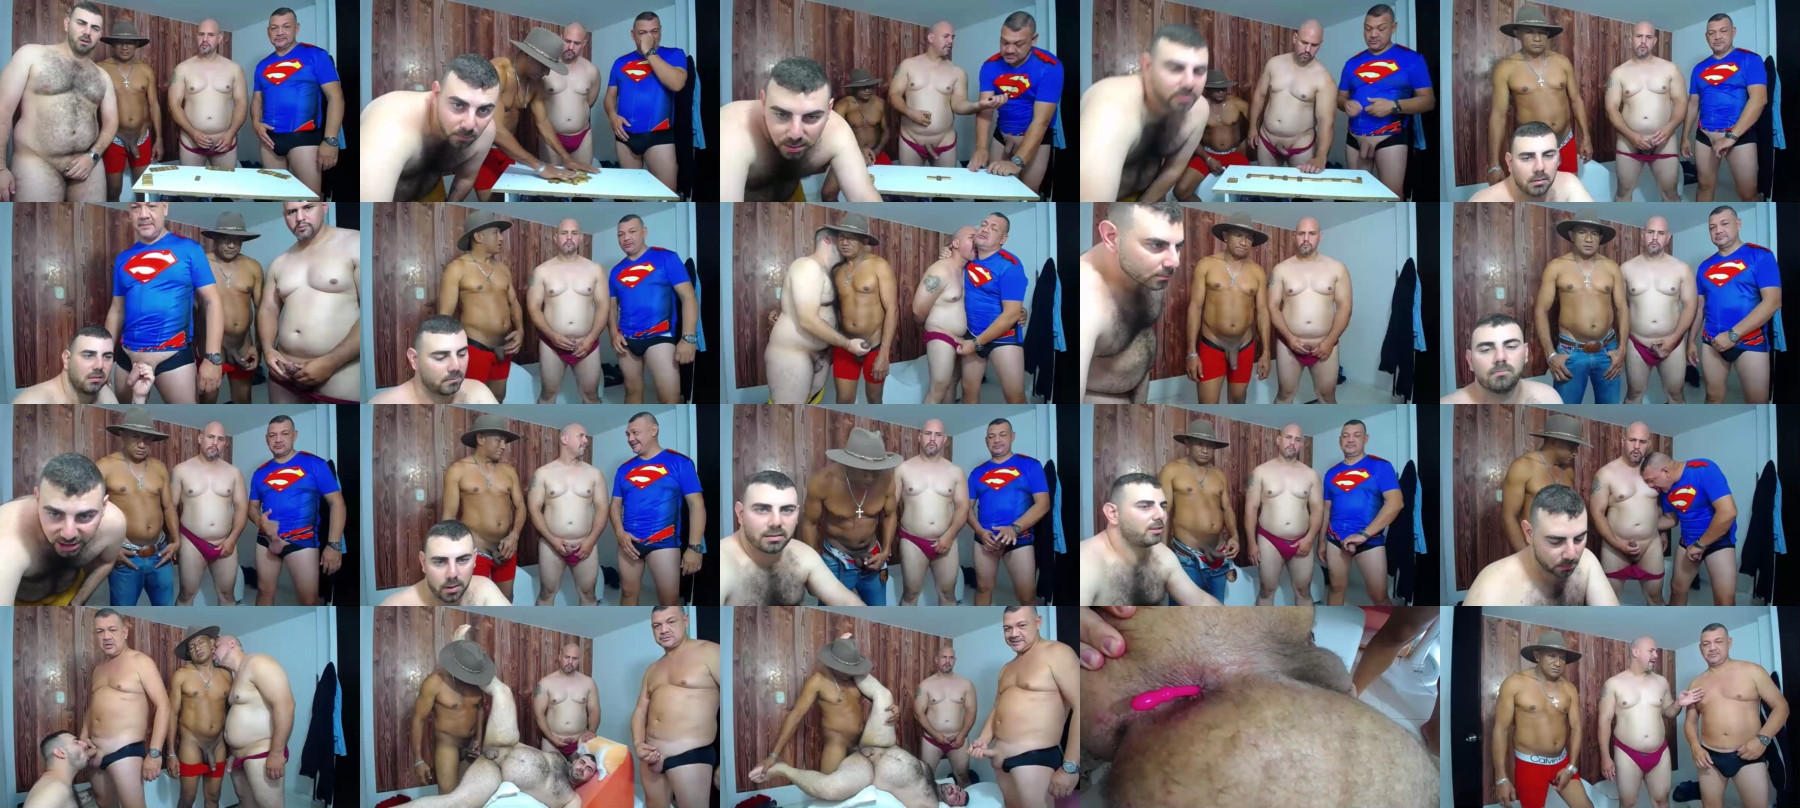 Dirty_Bears2 Nude CAM SHOW @ Chaturbate 24-05-2021